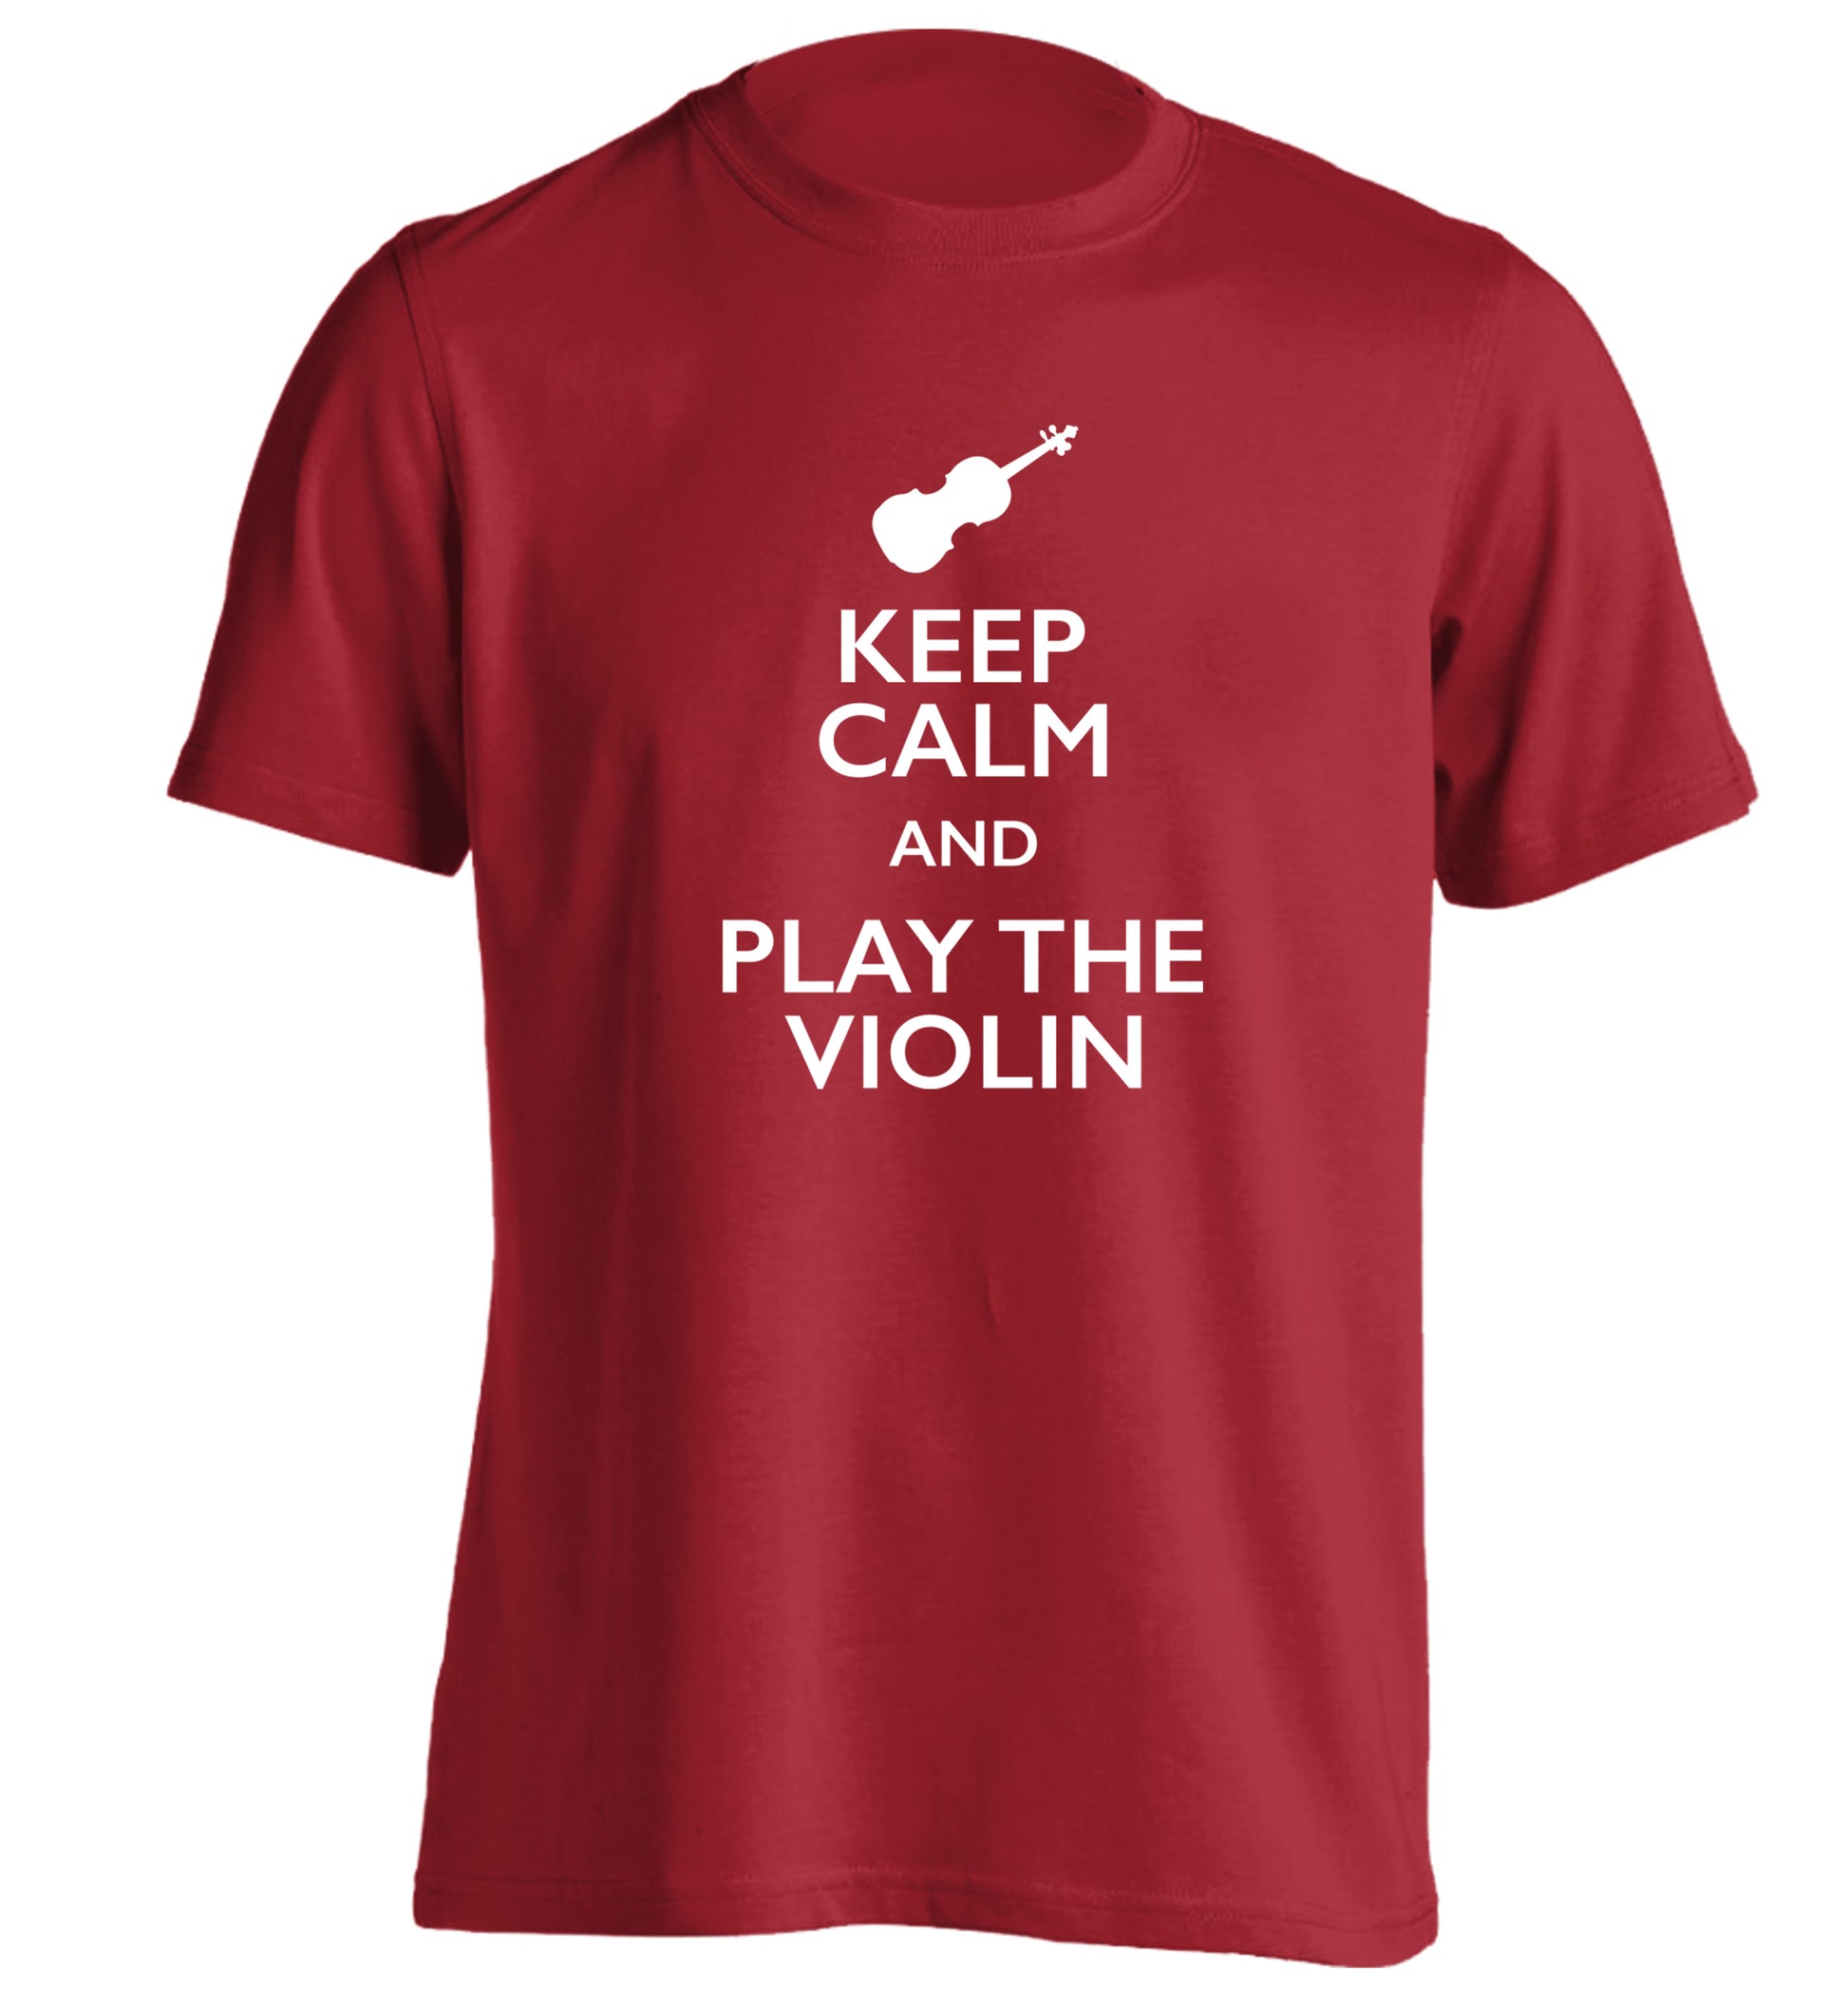 Keep calm and play the violin adults unisex red Tshirt 2XL